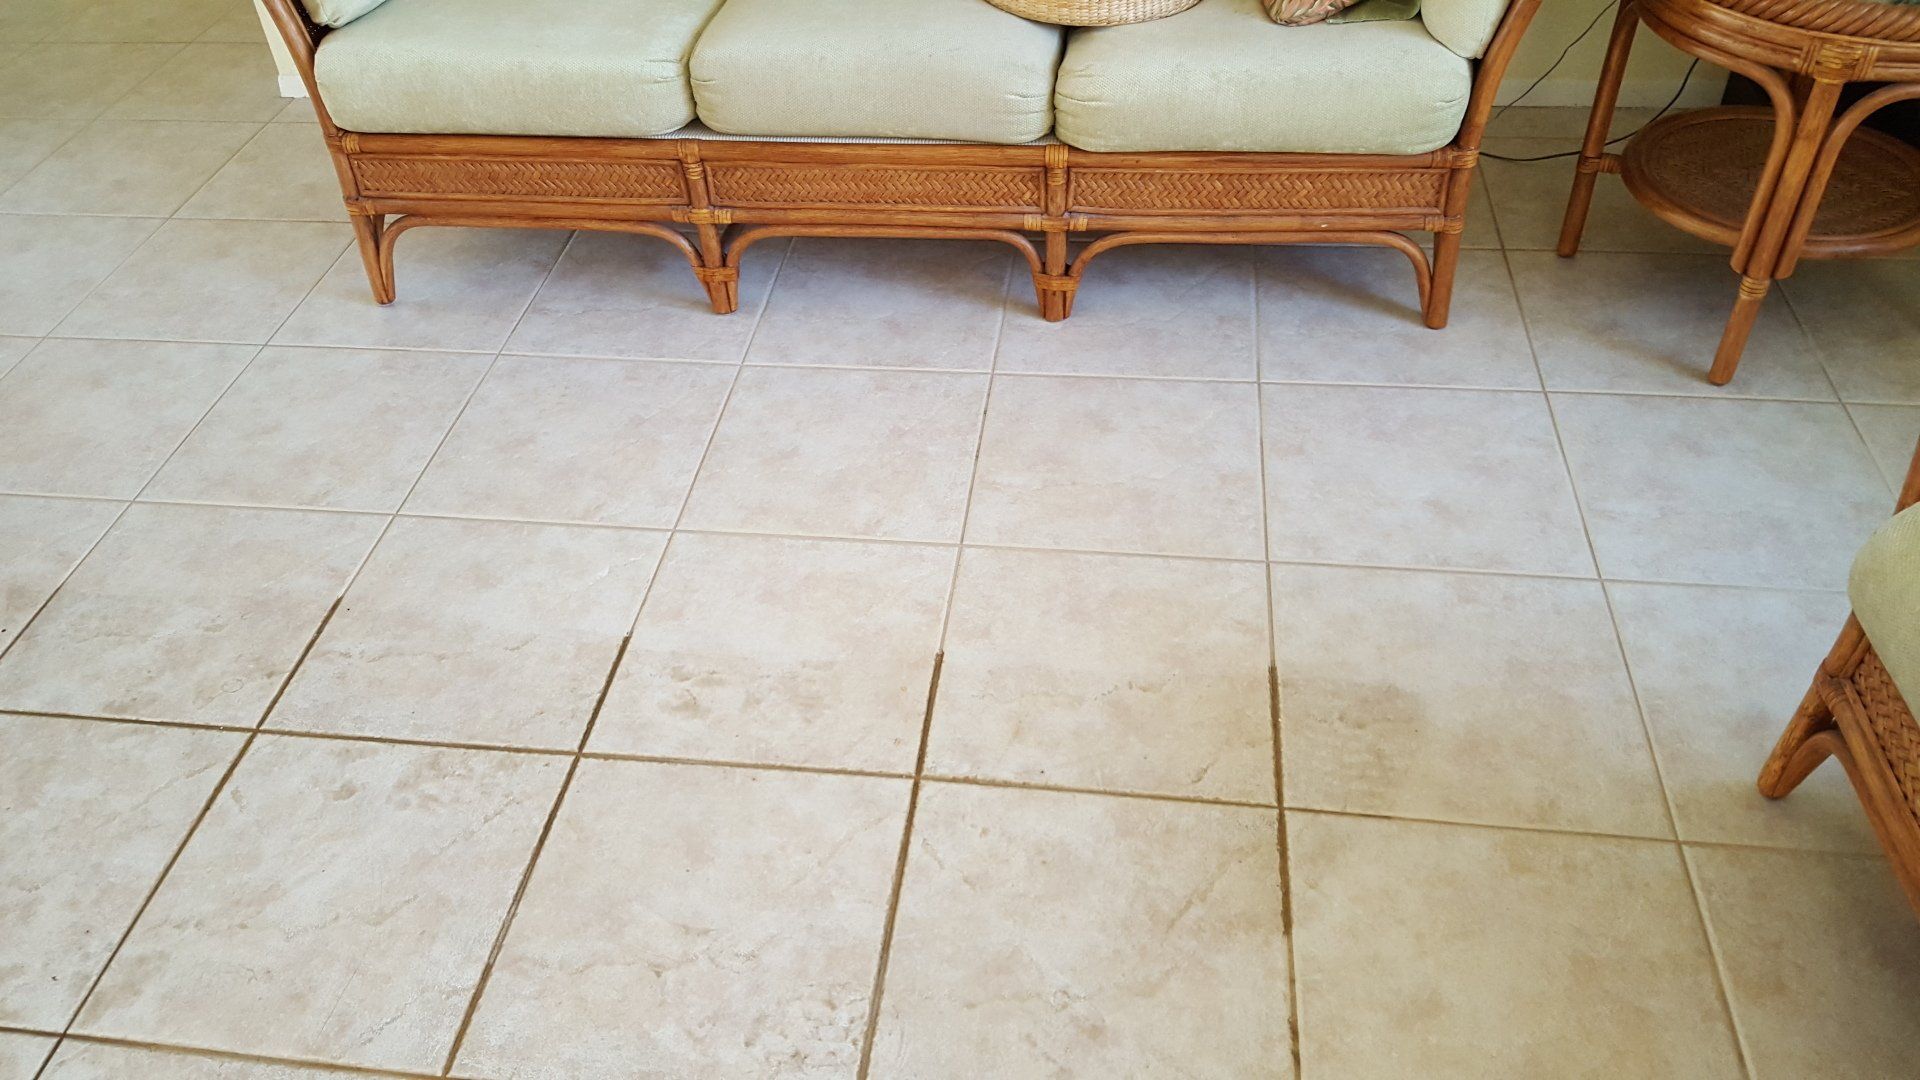 A floor after tile and grout cleaning in Punta Gorda, FL